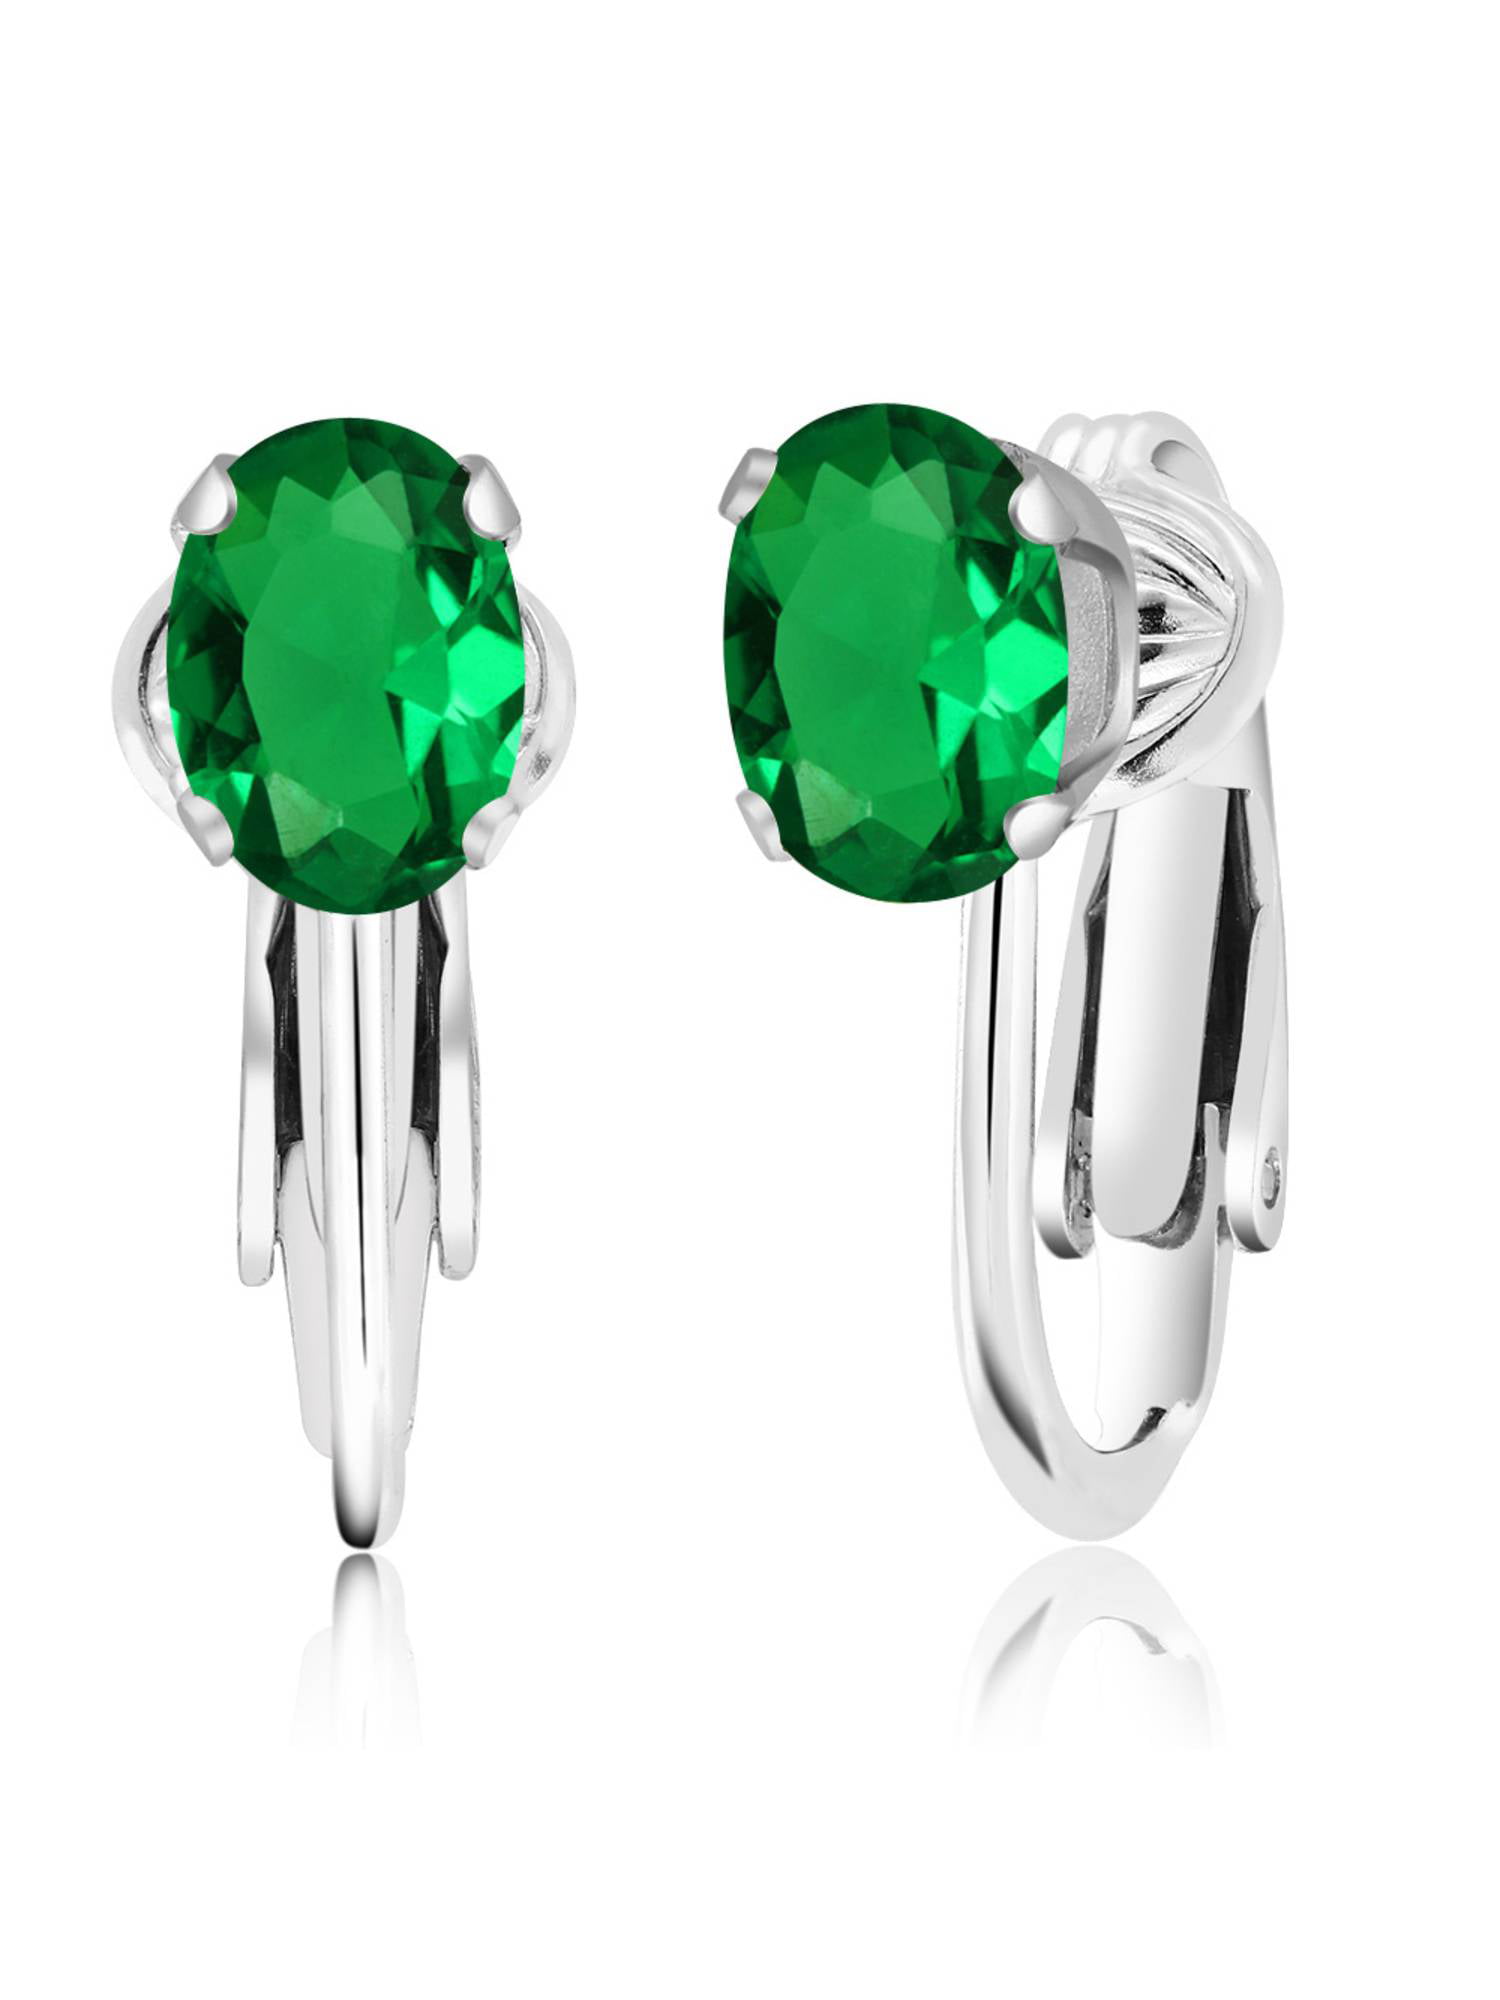 1.20 Ct Oval Simulated Emerald 925 Sterling Silver Leverback leverback earrings